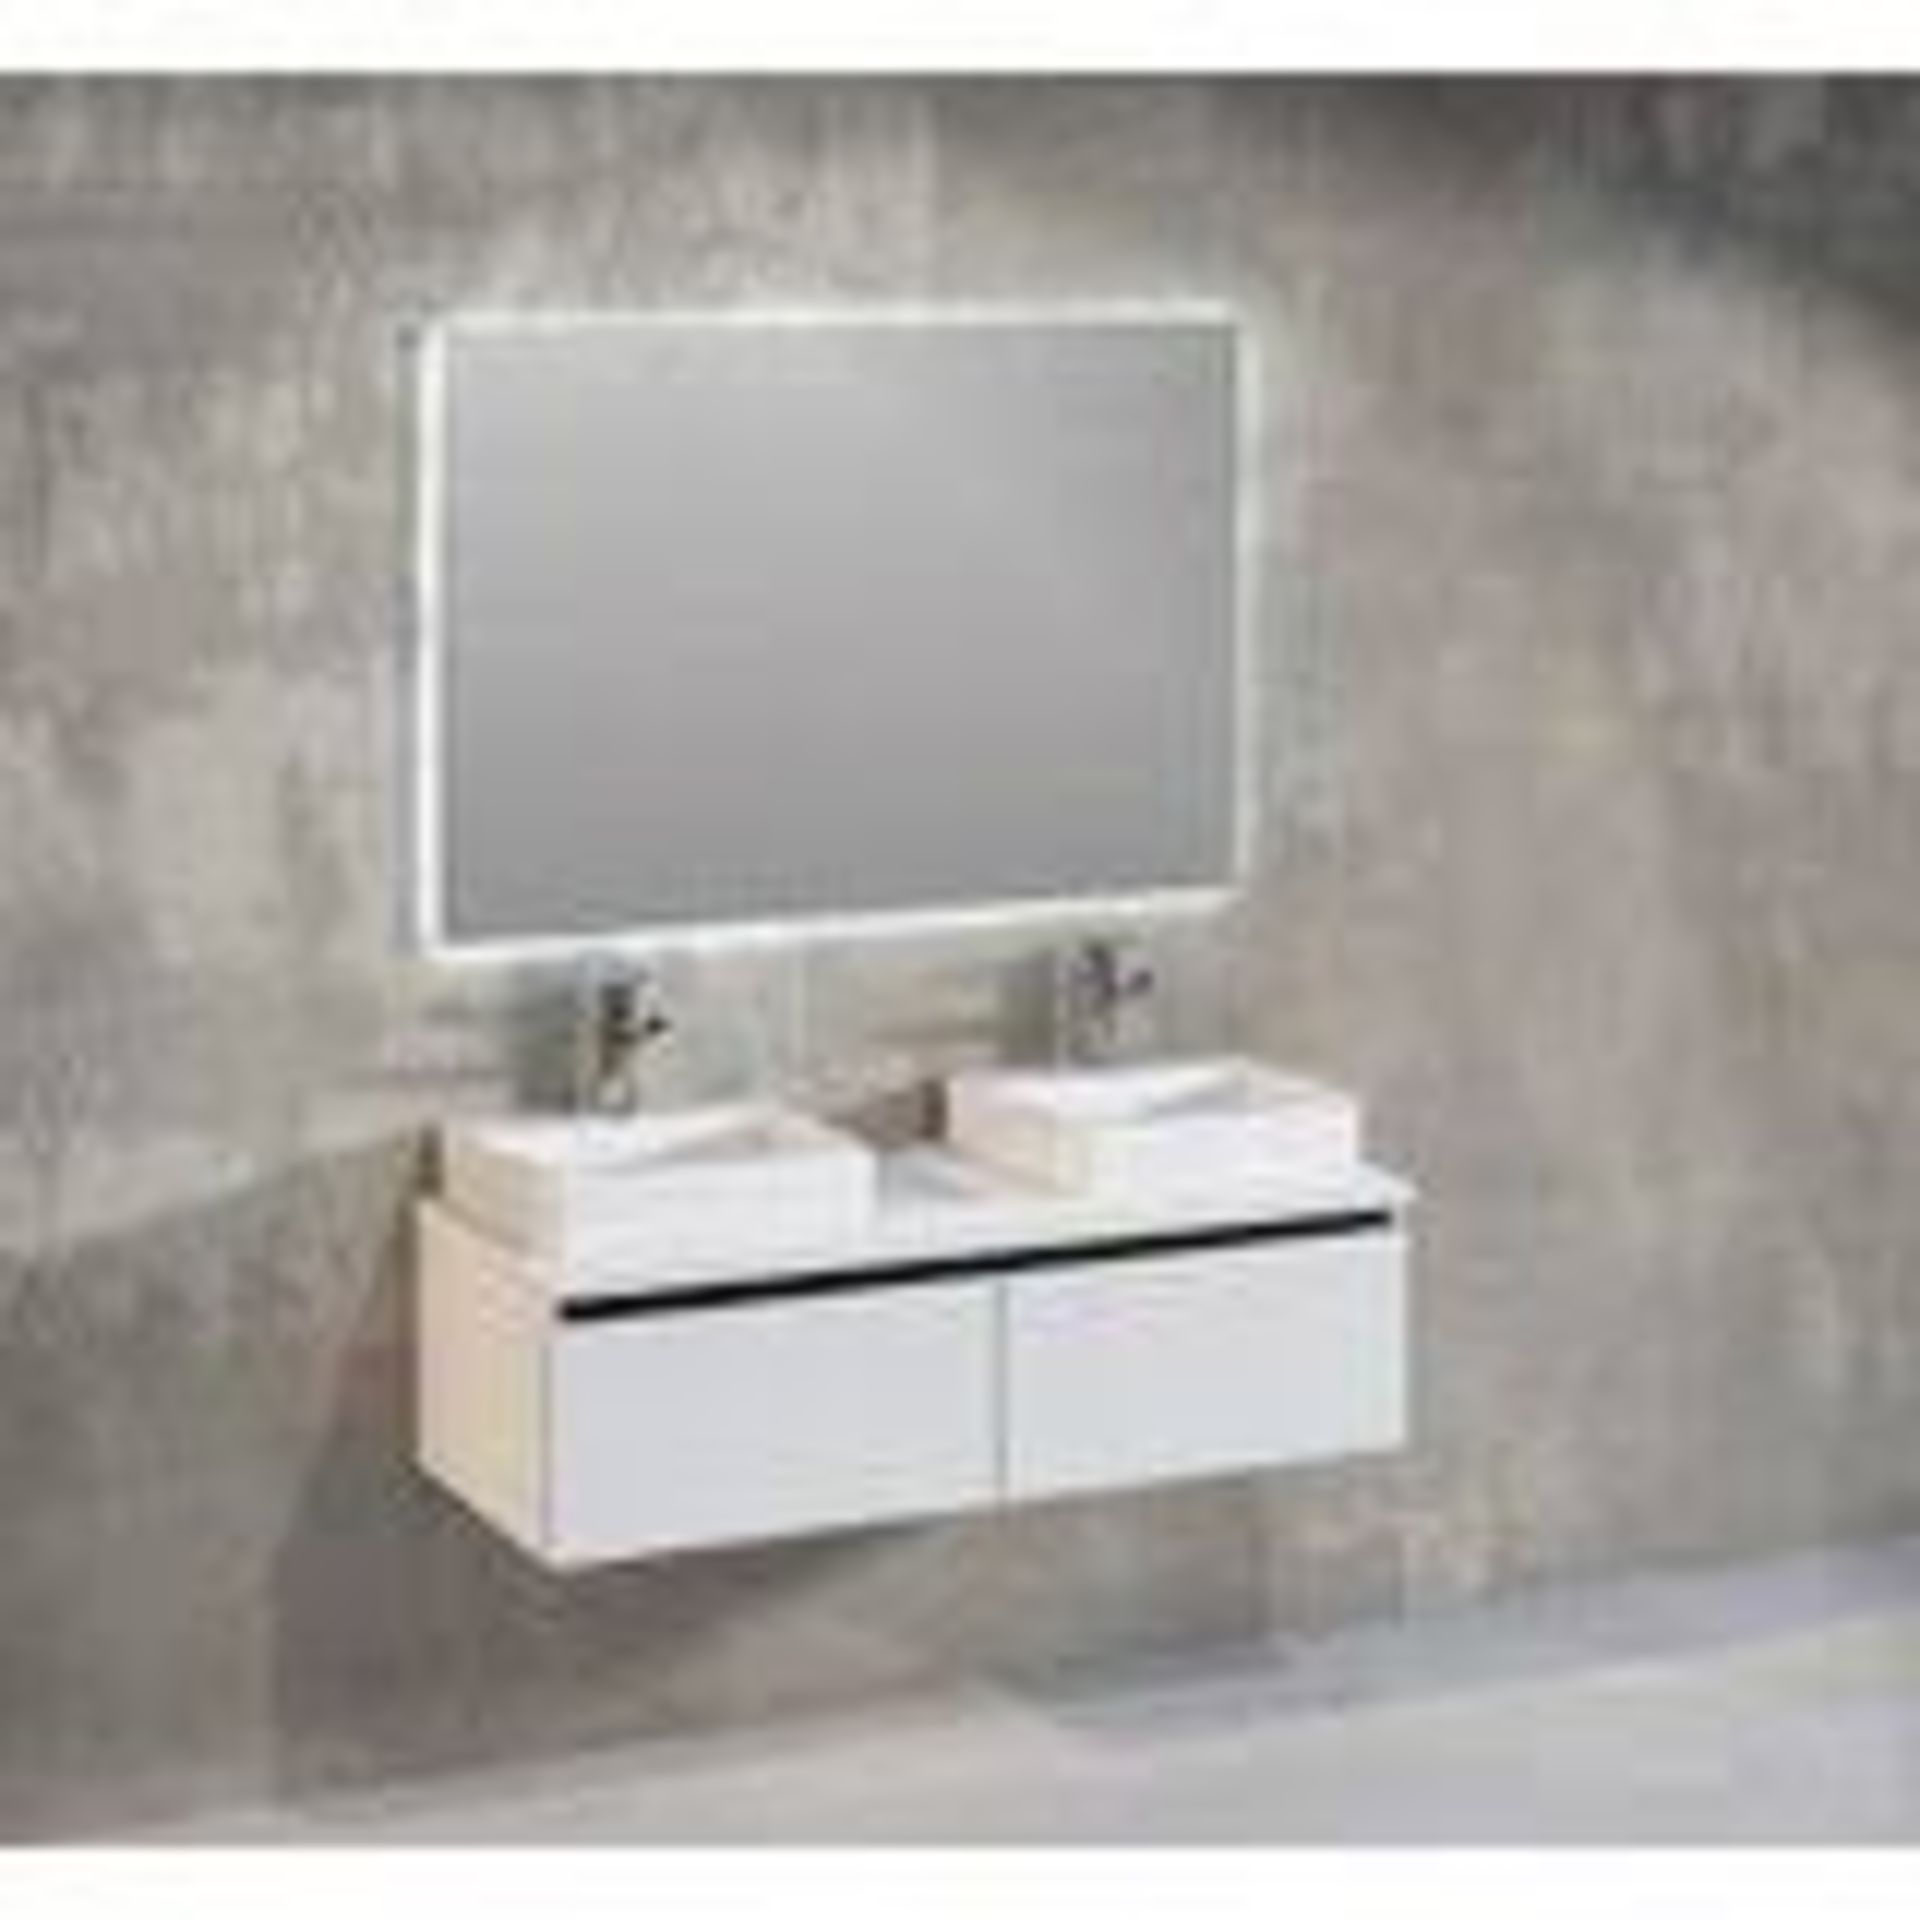 Boxed Large Gloss White Deisgner Wall Hung Ephraim Double Vanity Unit RRP £115 (19236) (Appraisals